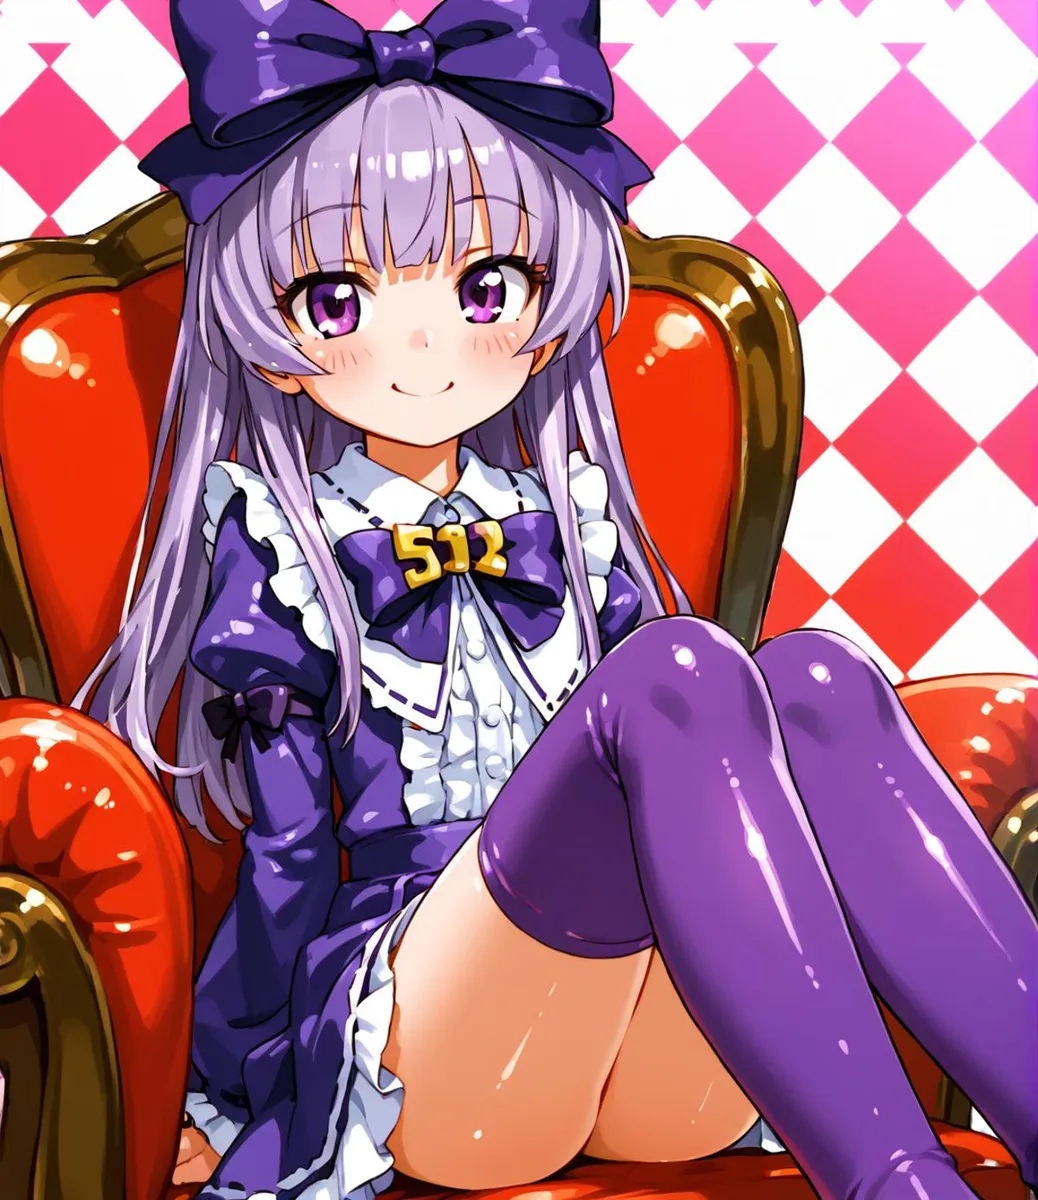 Anime girl with long lavender hair, large purple bow, and purple dress sitting on a red chair against a pink and white checkered background. This is an AI generated image using stable diffusion.